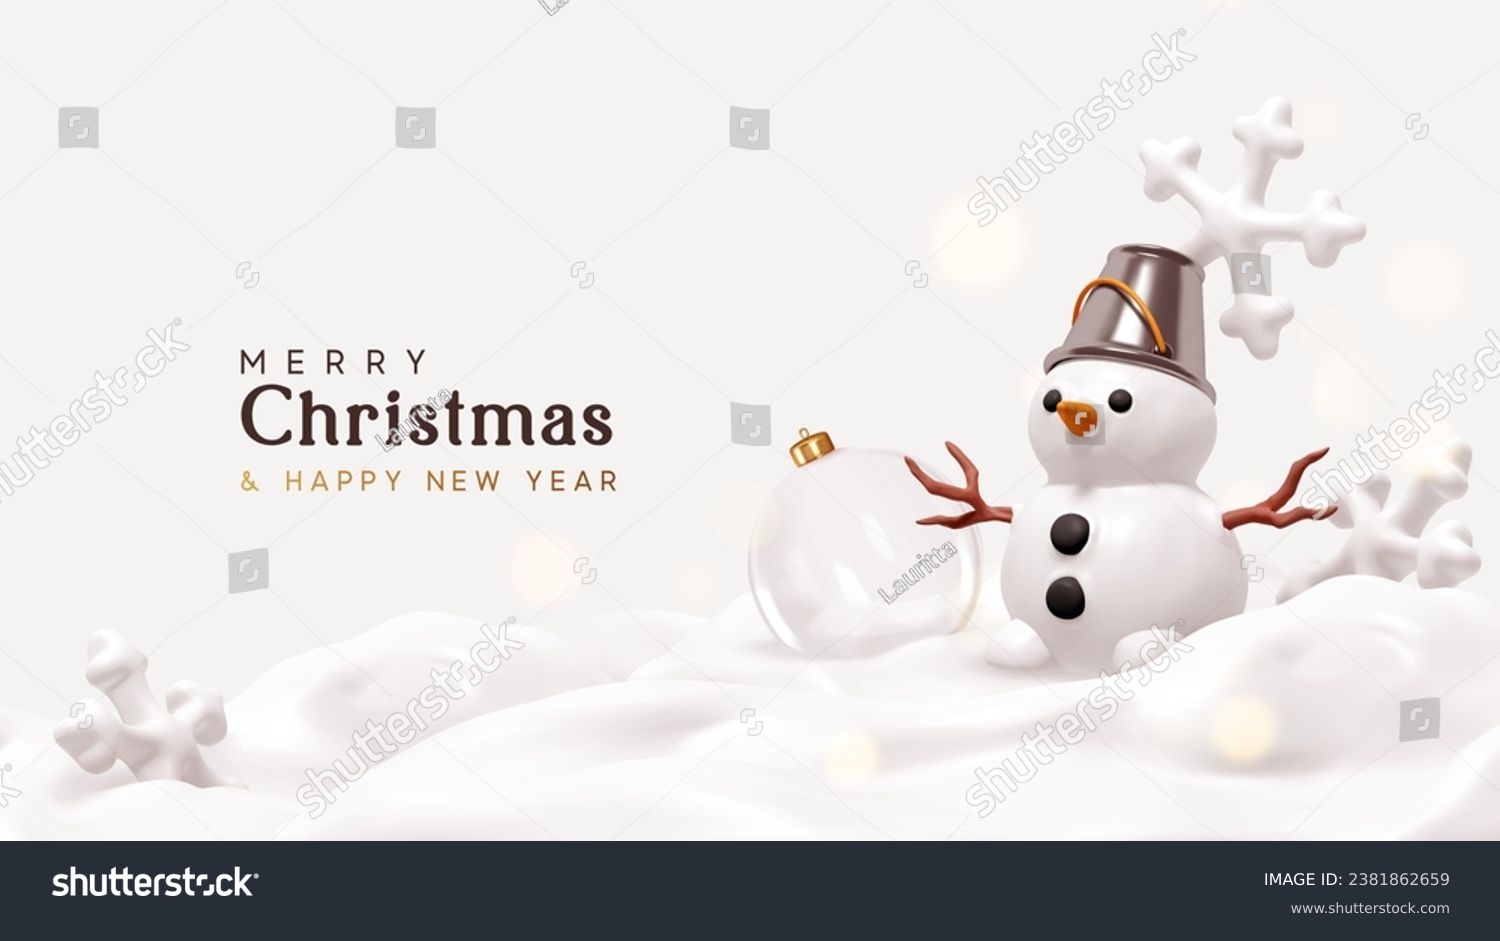 Christmas snowman with silver bucket on his head. Snowman in snow with white snowflakes. Realistic 3d cartoon style. Winter Christmas background. Vector illustration #2381862659